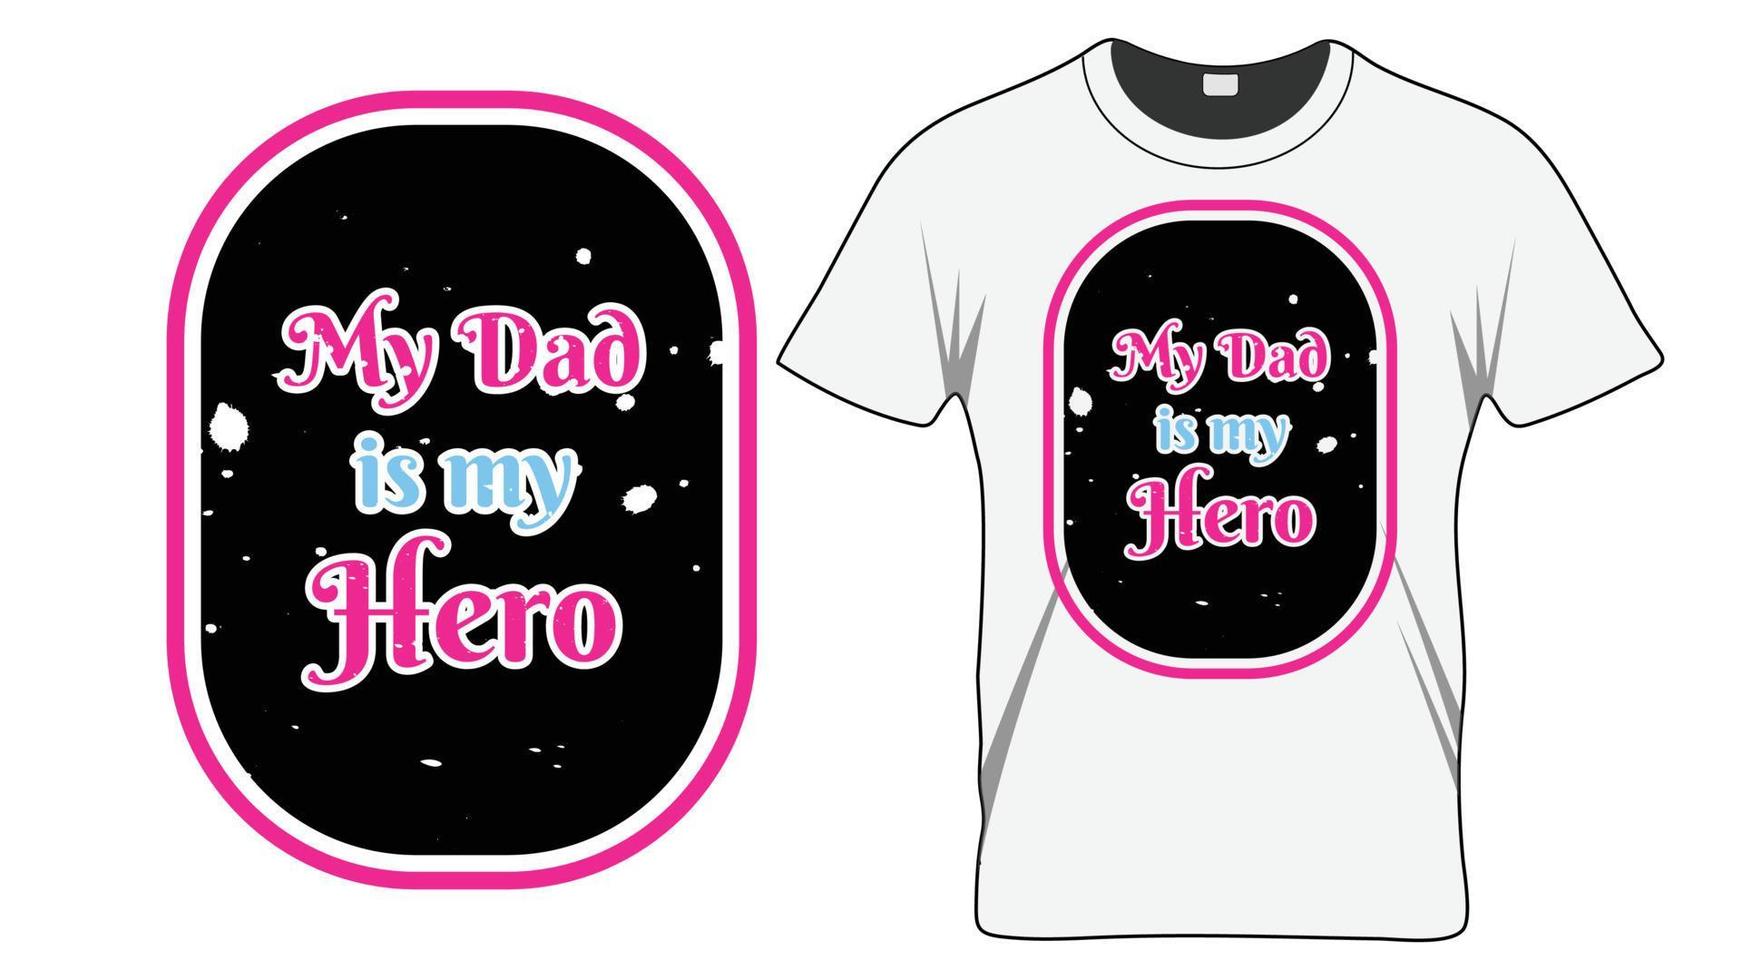 My Dad is My Hero Father's Day Typography Quote . Gift for dad vector